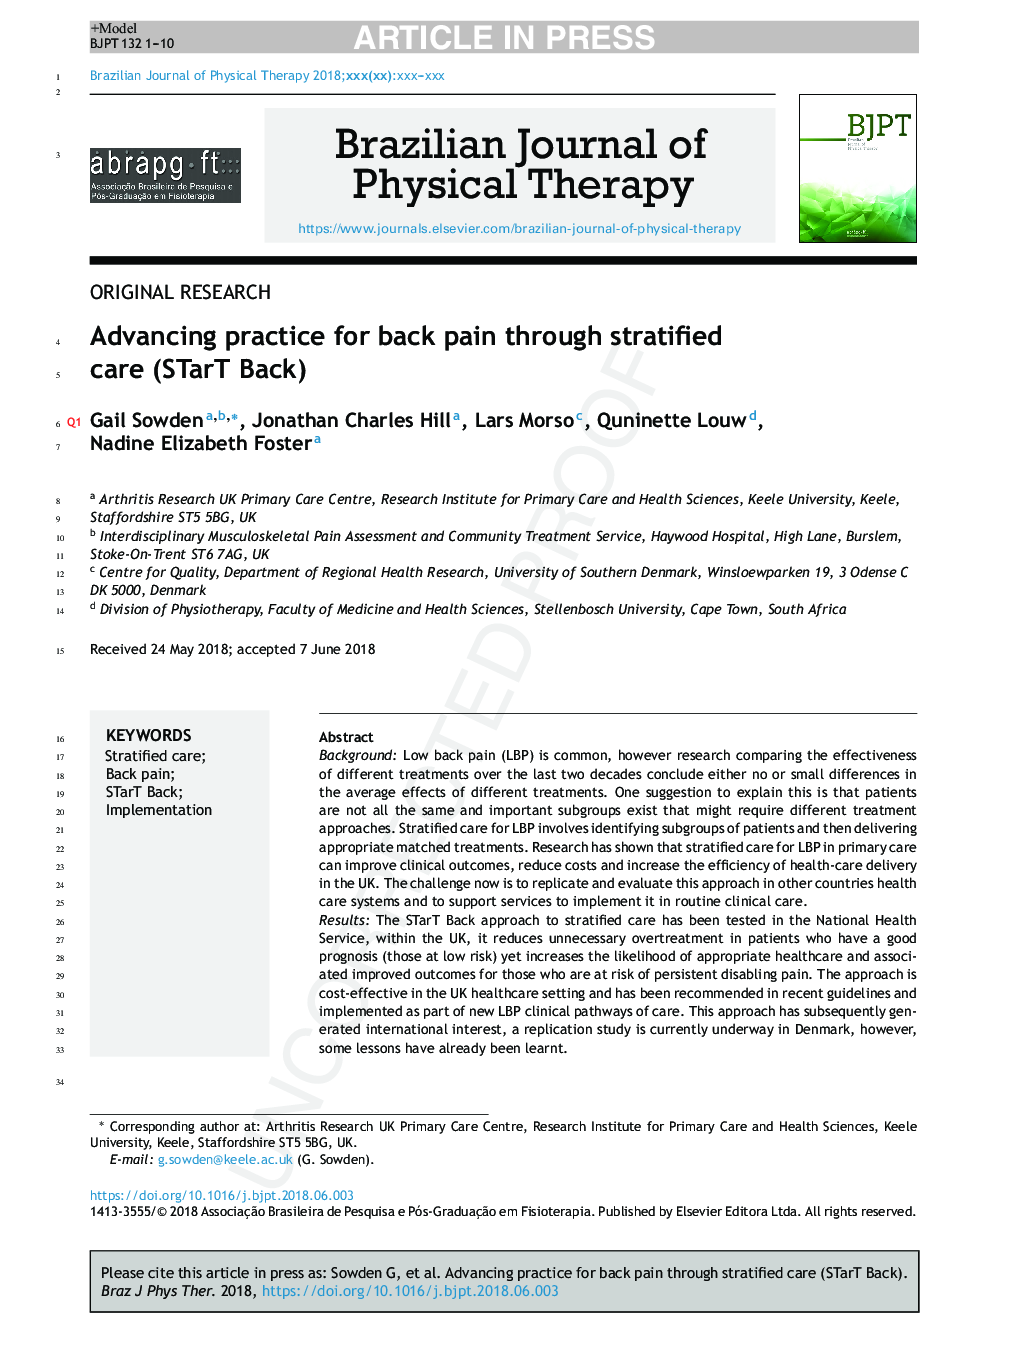 Advancing practice for back pain through stratified care (STarT Back)